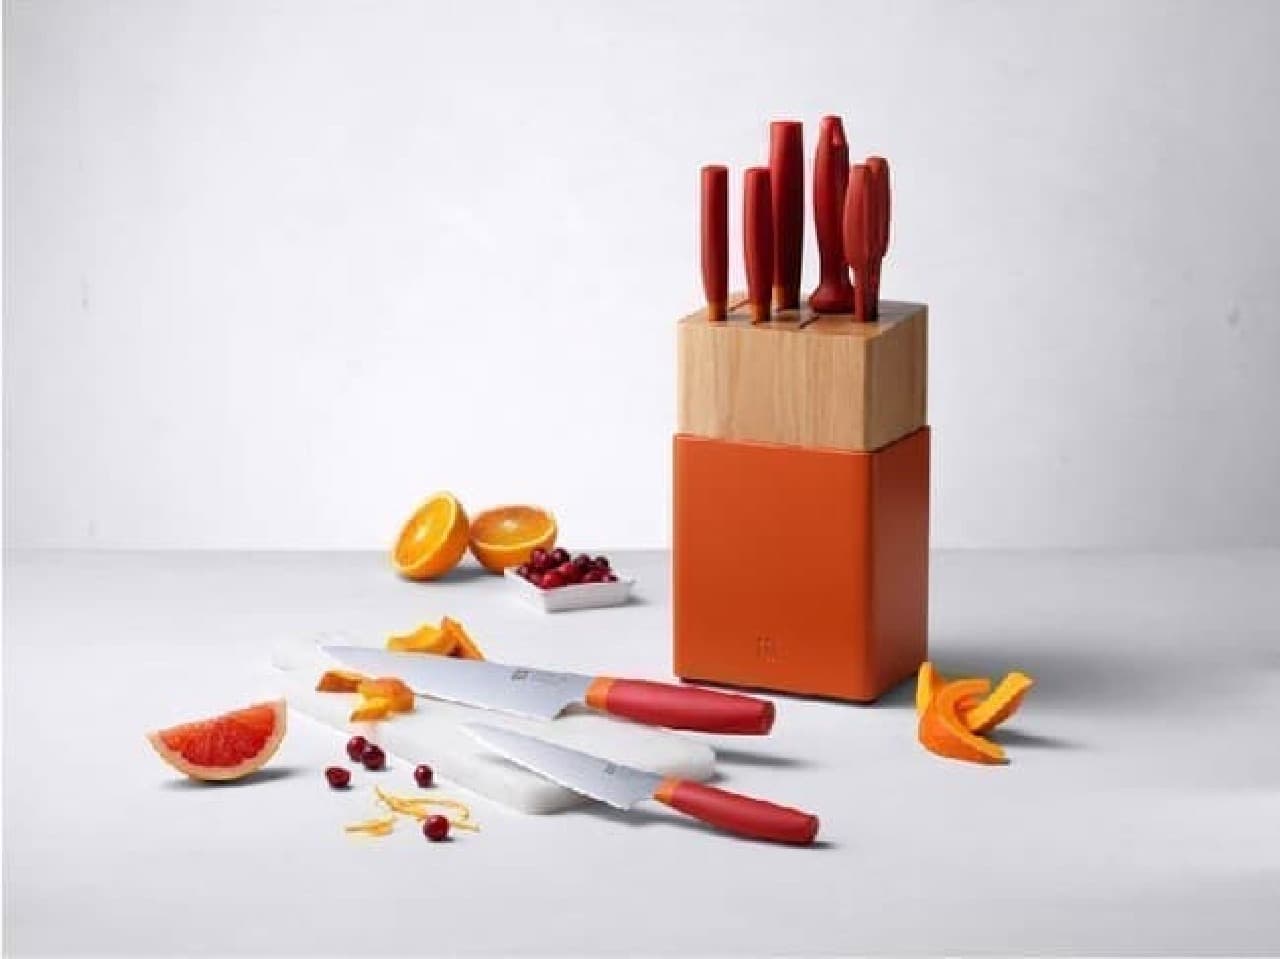 From Zwilling, the colorful knife series "ZWILLING Now S"